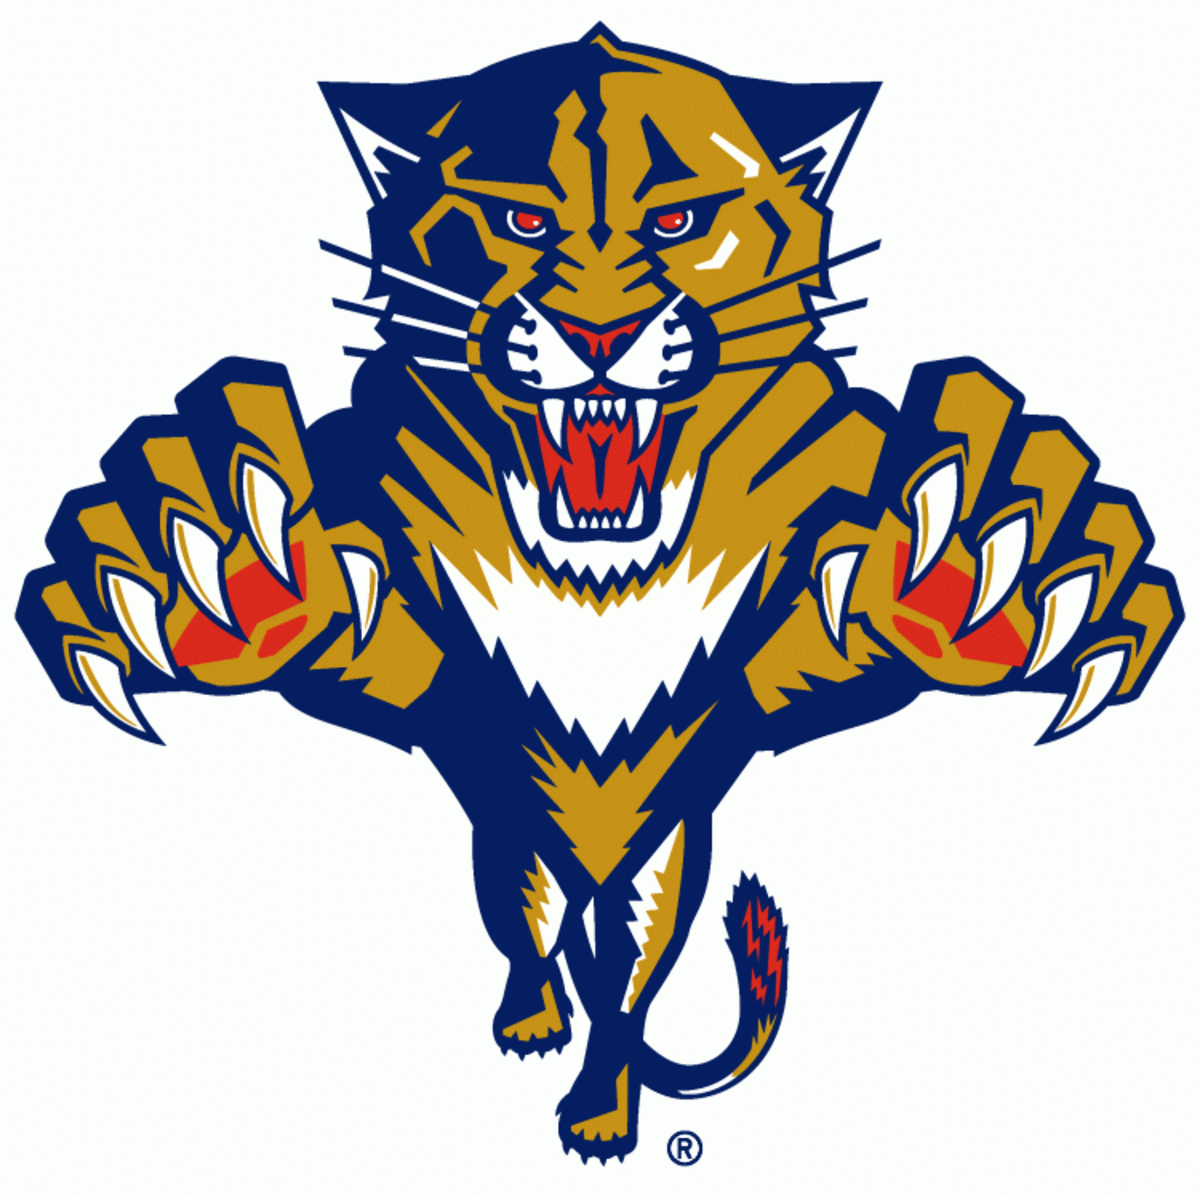 Florida Panthers Primary Logo (1994) - A gold, blue, and red Florida panther leaping forward.